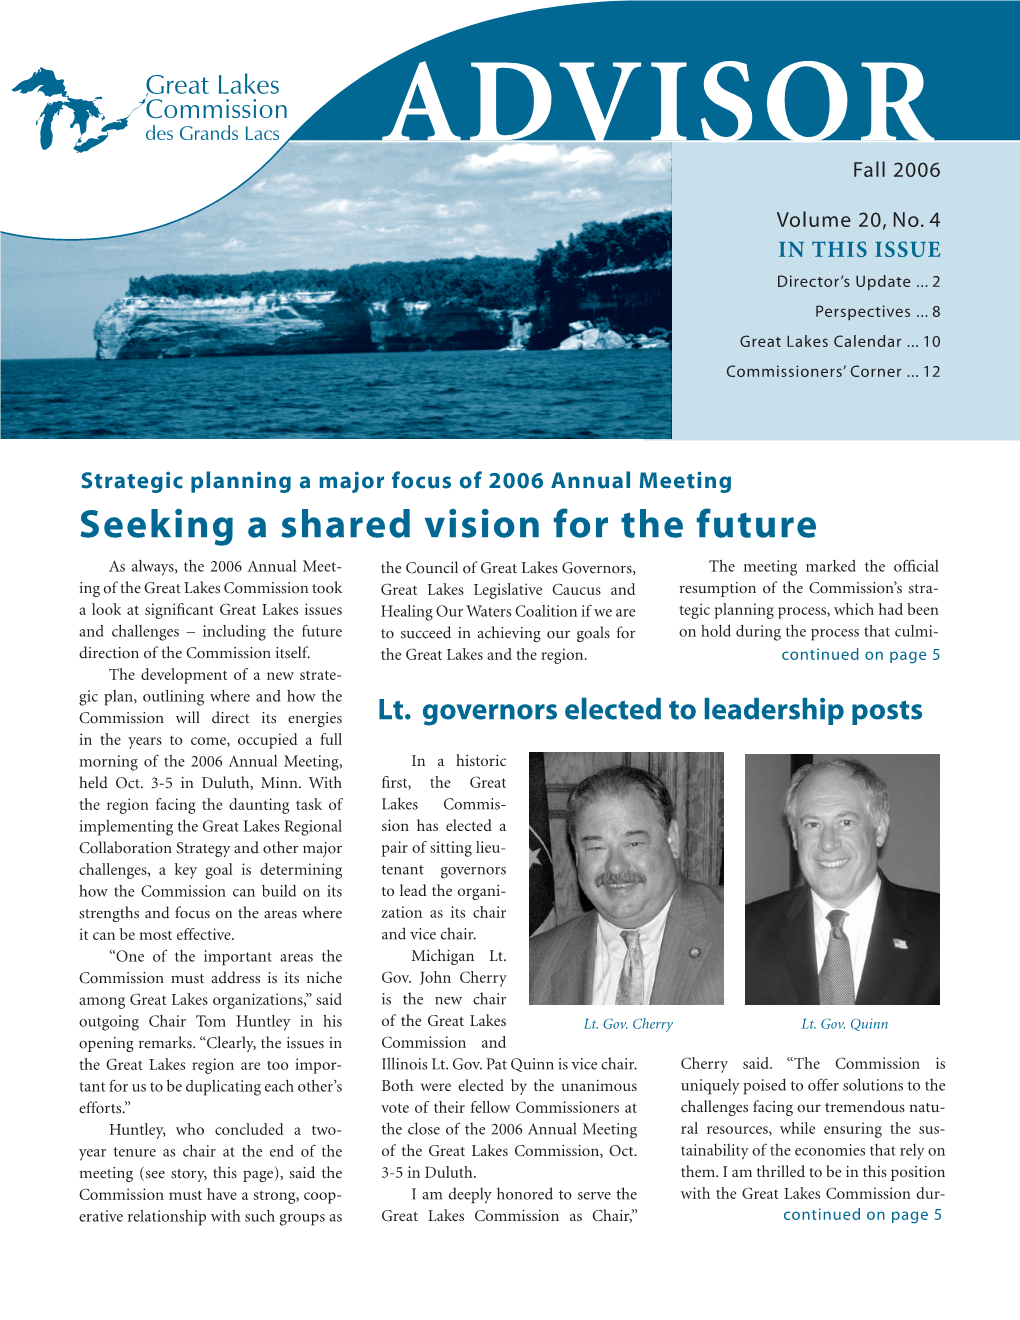 Seeking a Shared Vision for the Future